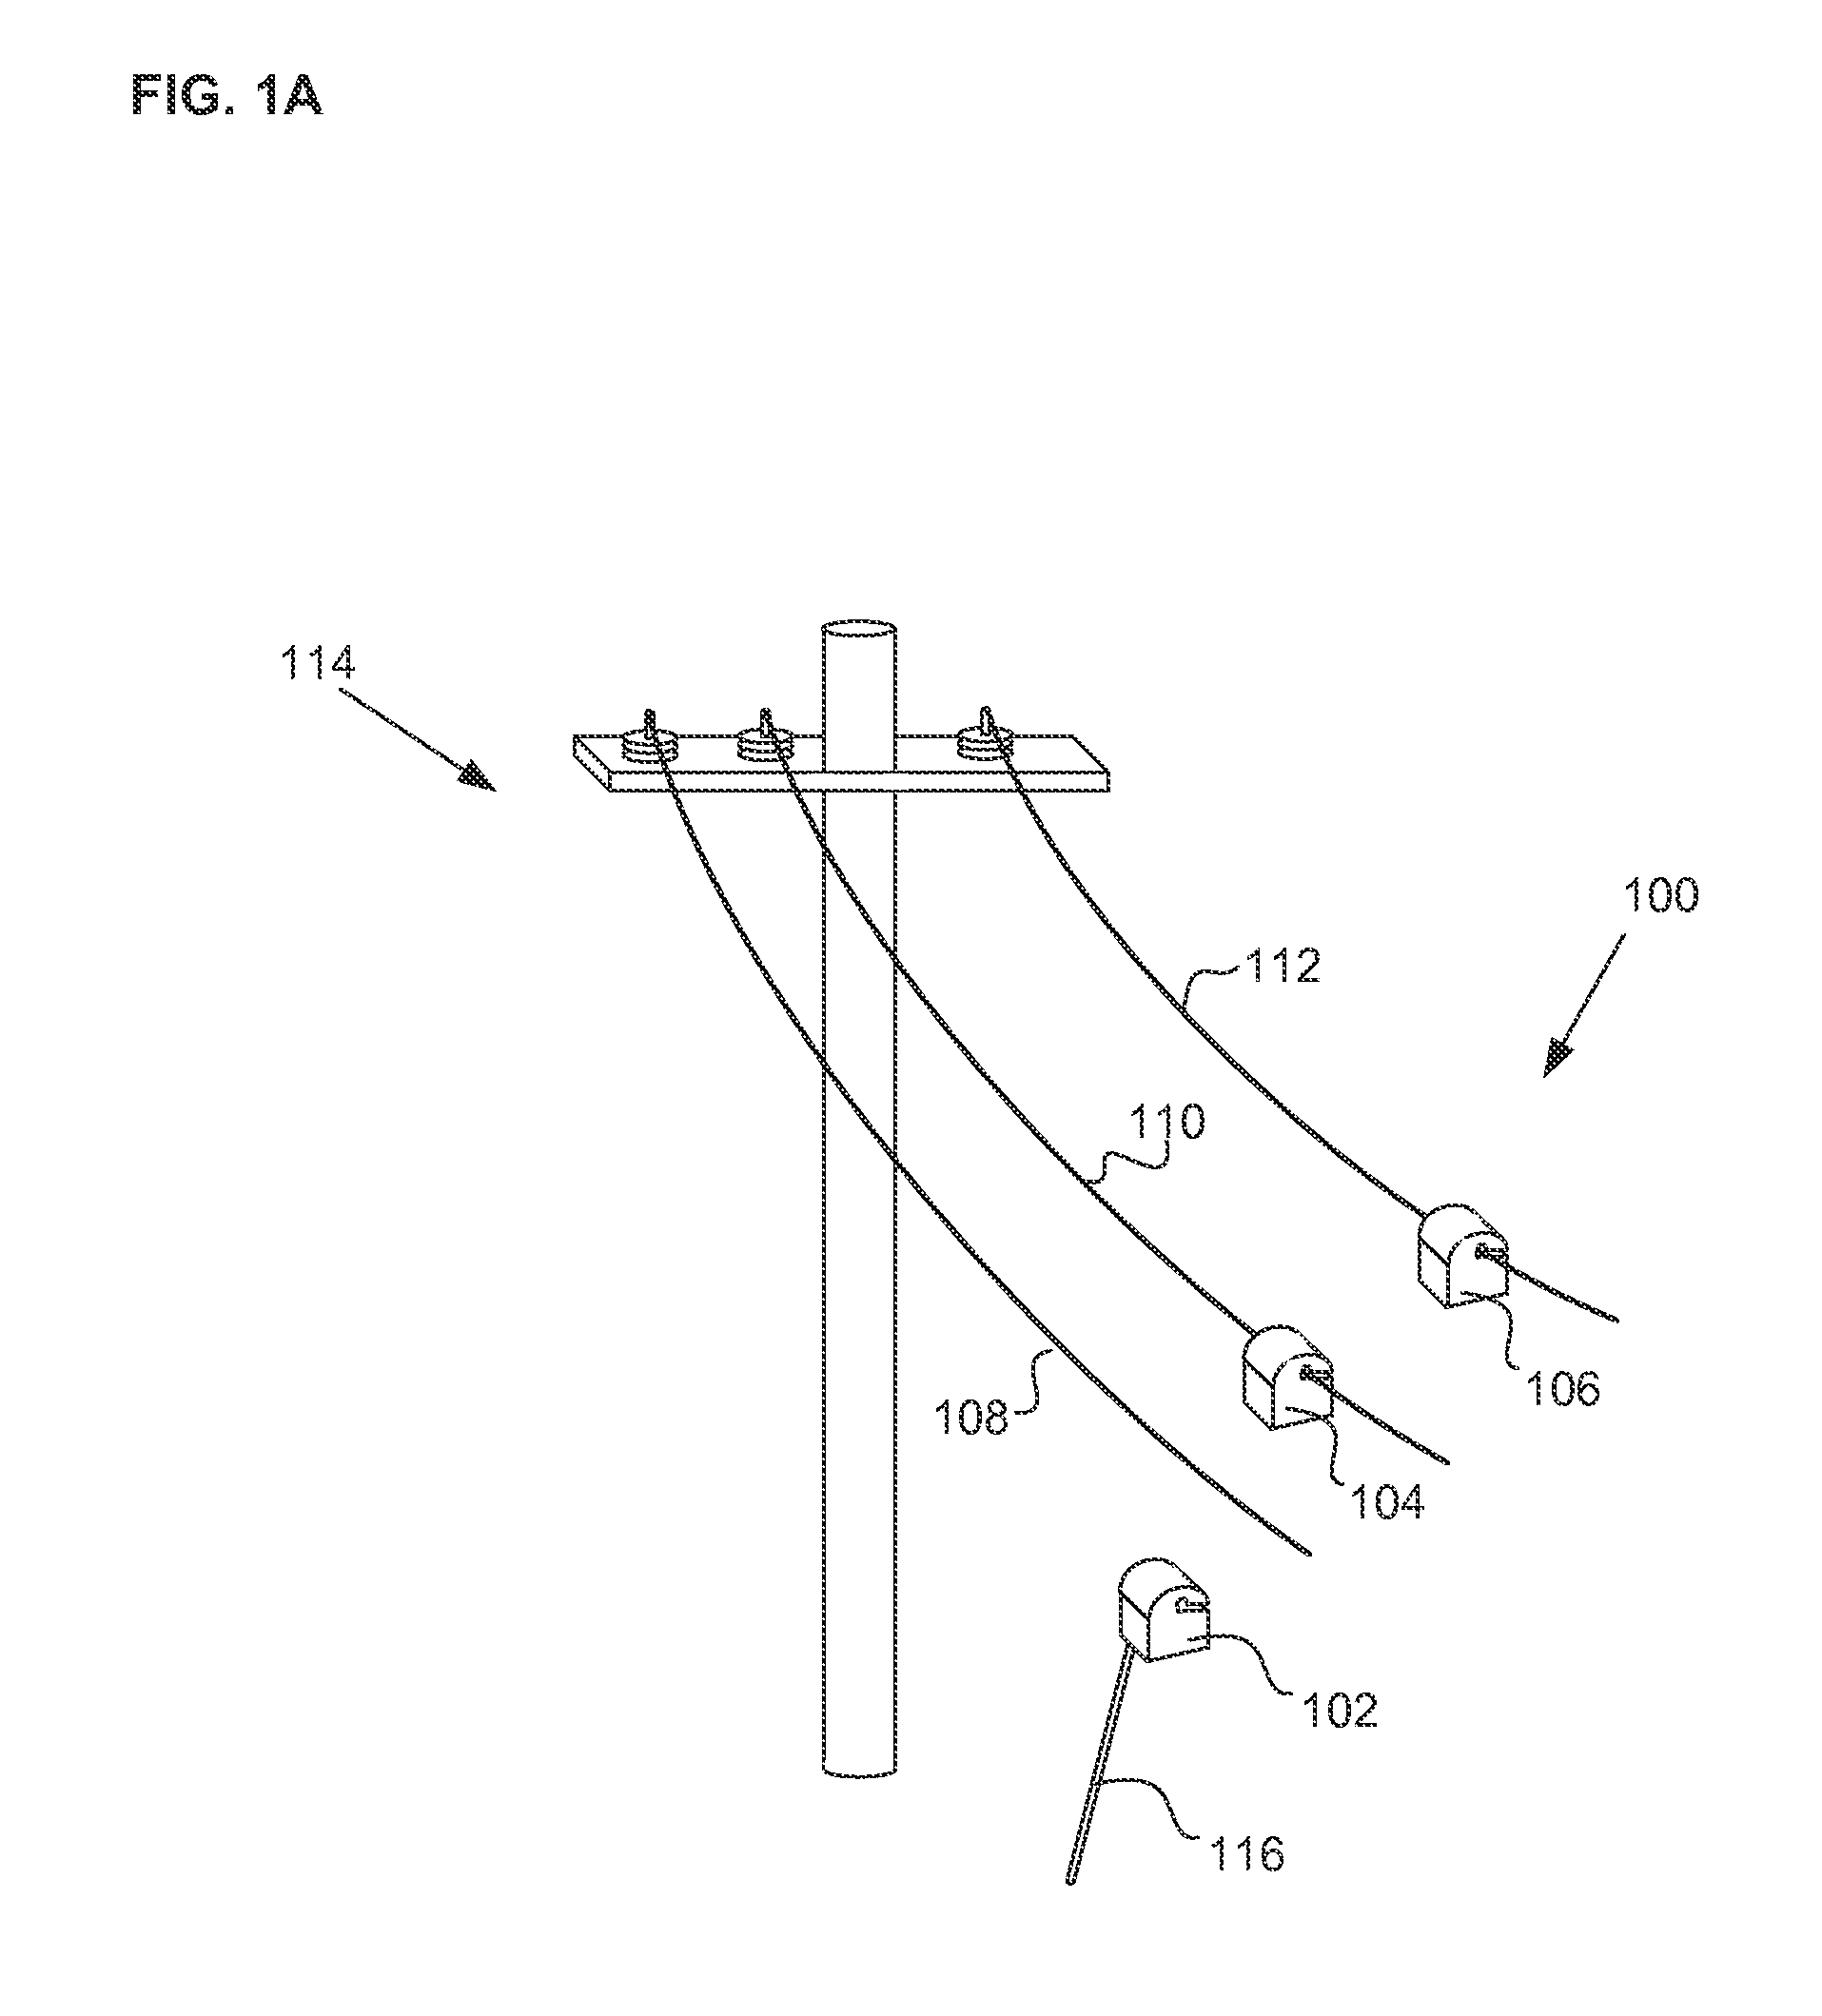 Power Conductor Monitoring Device and Method of Calibration